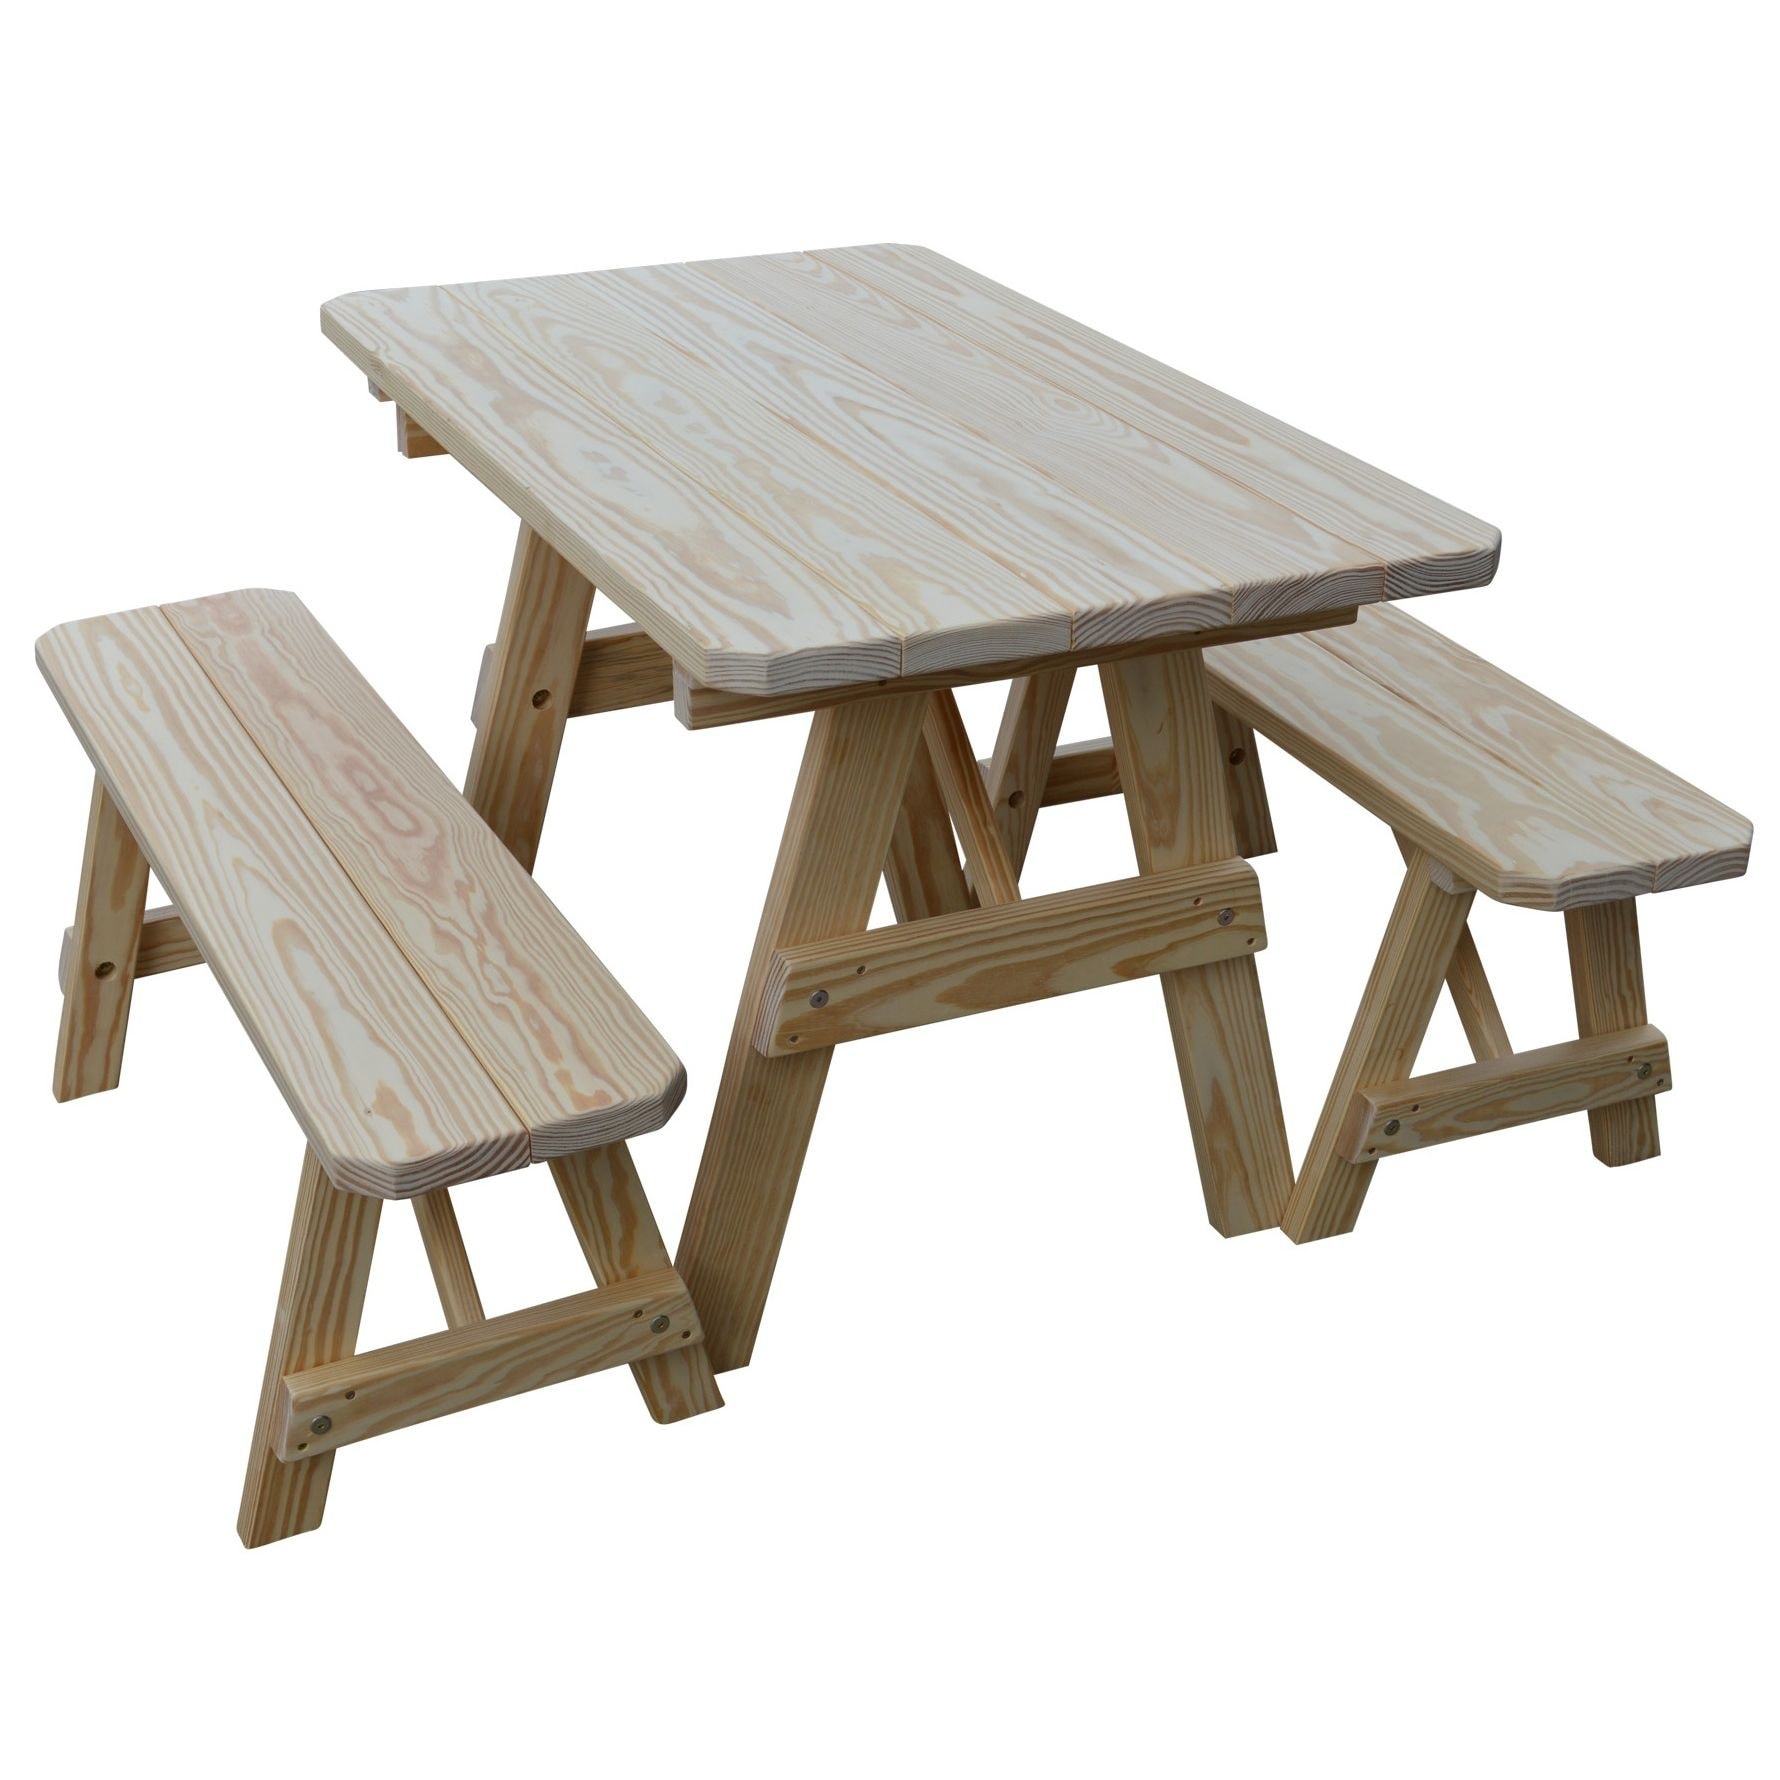 Pressure Treated Pine 4 Traditional Picnic Table With 2 Benches